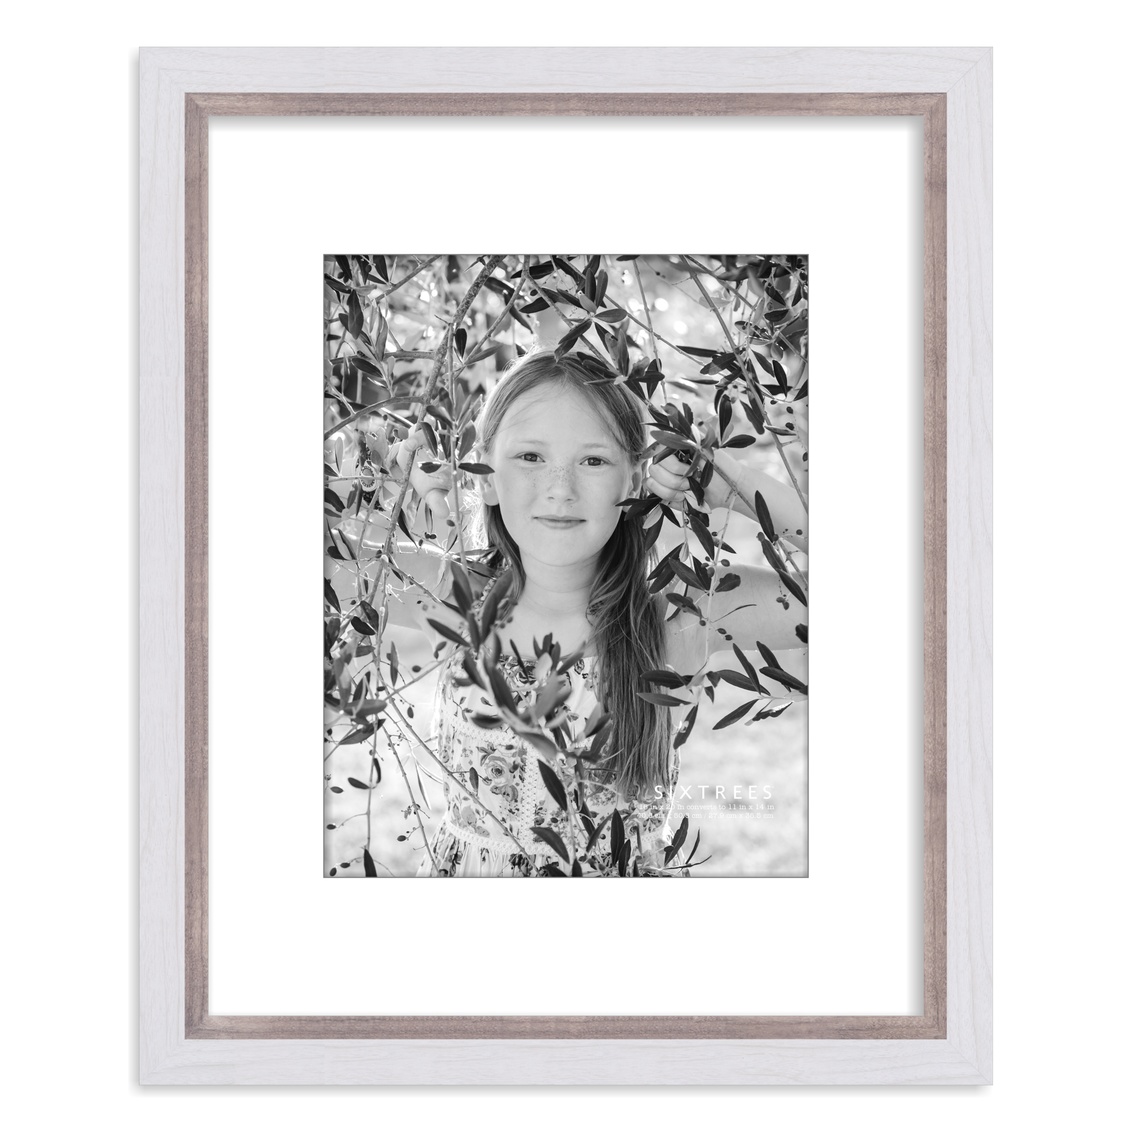 Stockage Supreme 16 x 20 in. Shelby White & Grey Matted Dual Wood Picture Frame